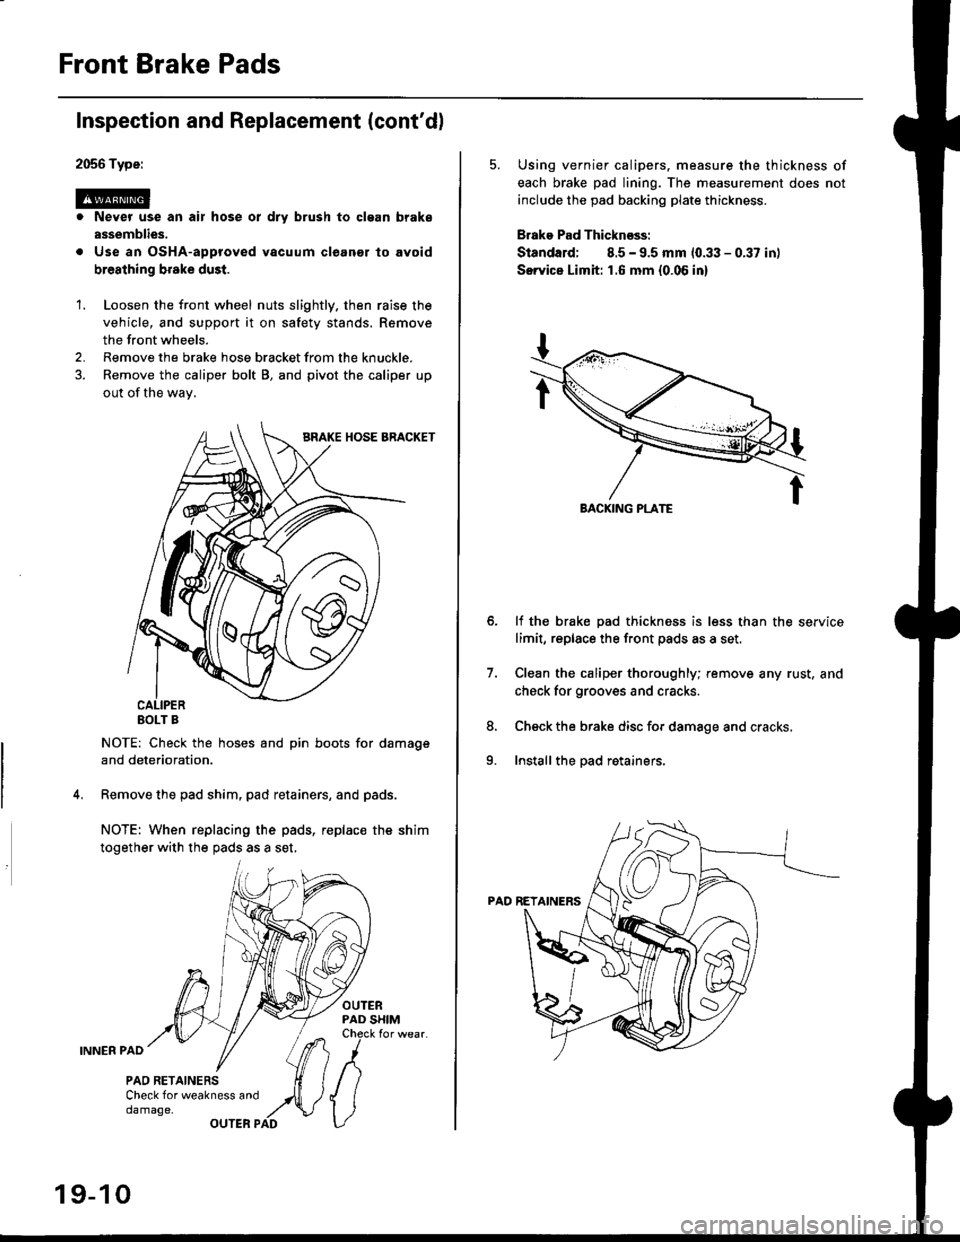 HONDA CIVIC 2000 6.G Workshop Manual Front Brake Pads
2056 Type:
@. Never use an air hose or dry brush to clgan brake
assemblies.
. Use an OsHA-approved vacuum cleanor lo avoid
breathing broke dust.
Inspection and Replacement (contdl
1.